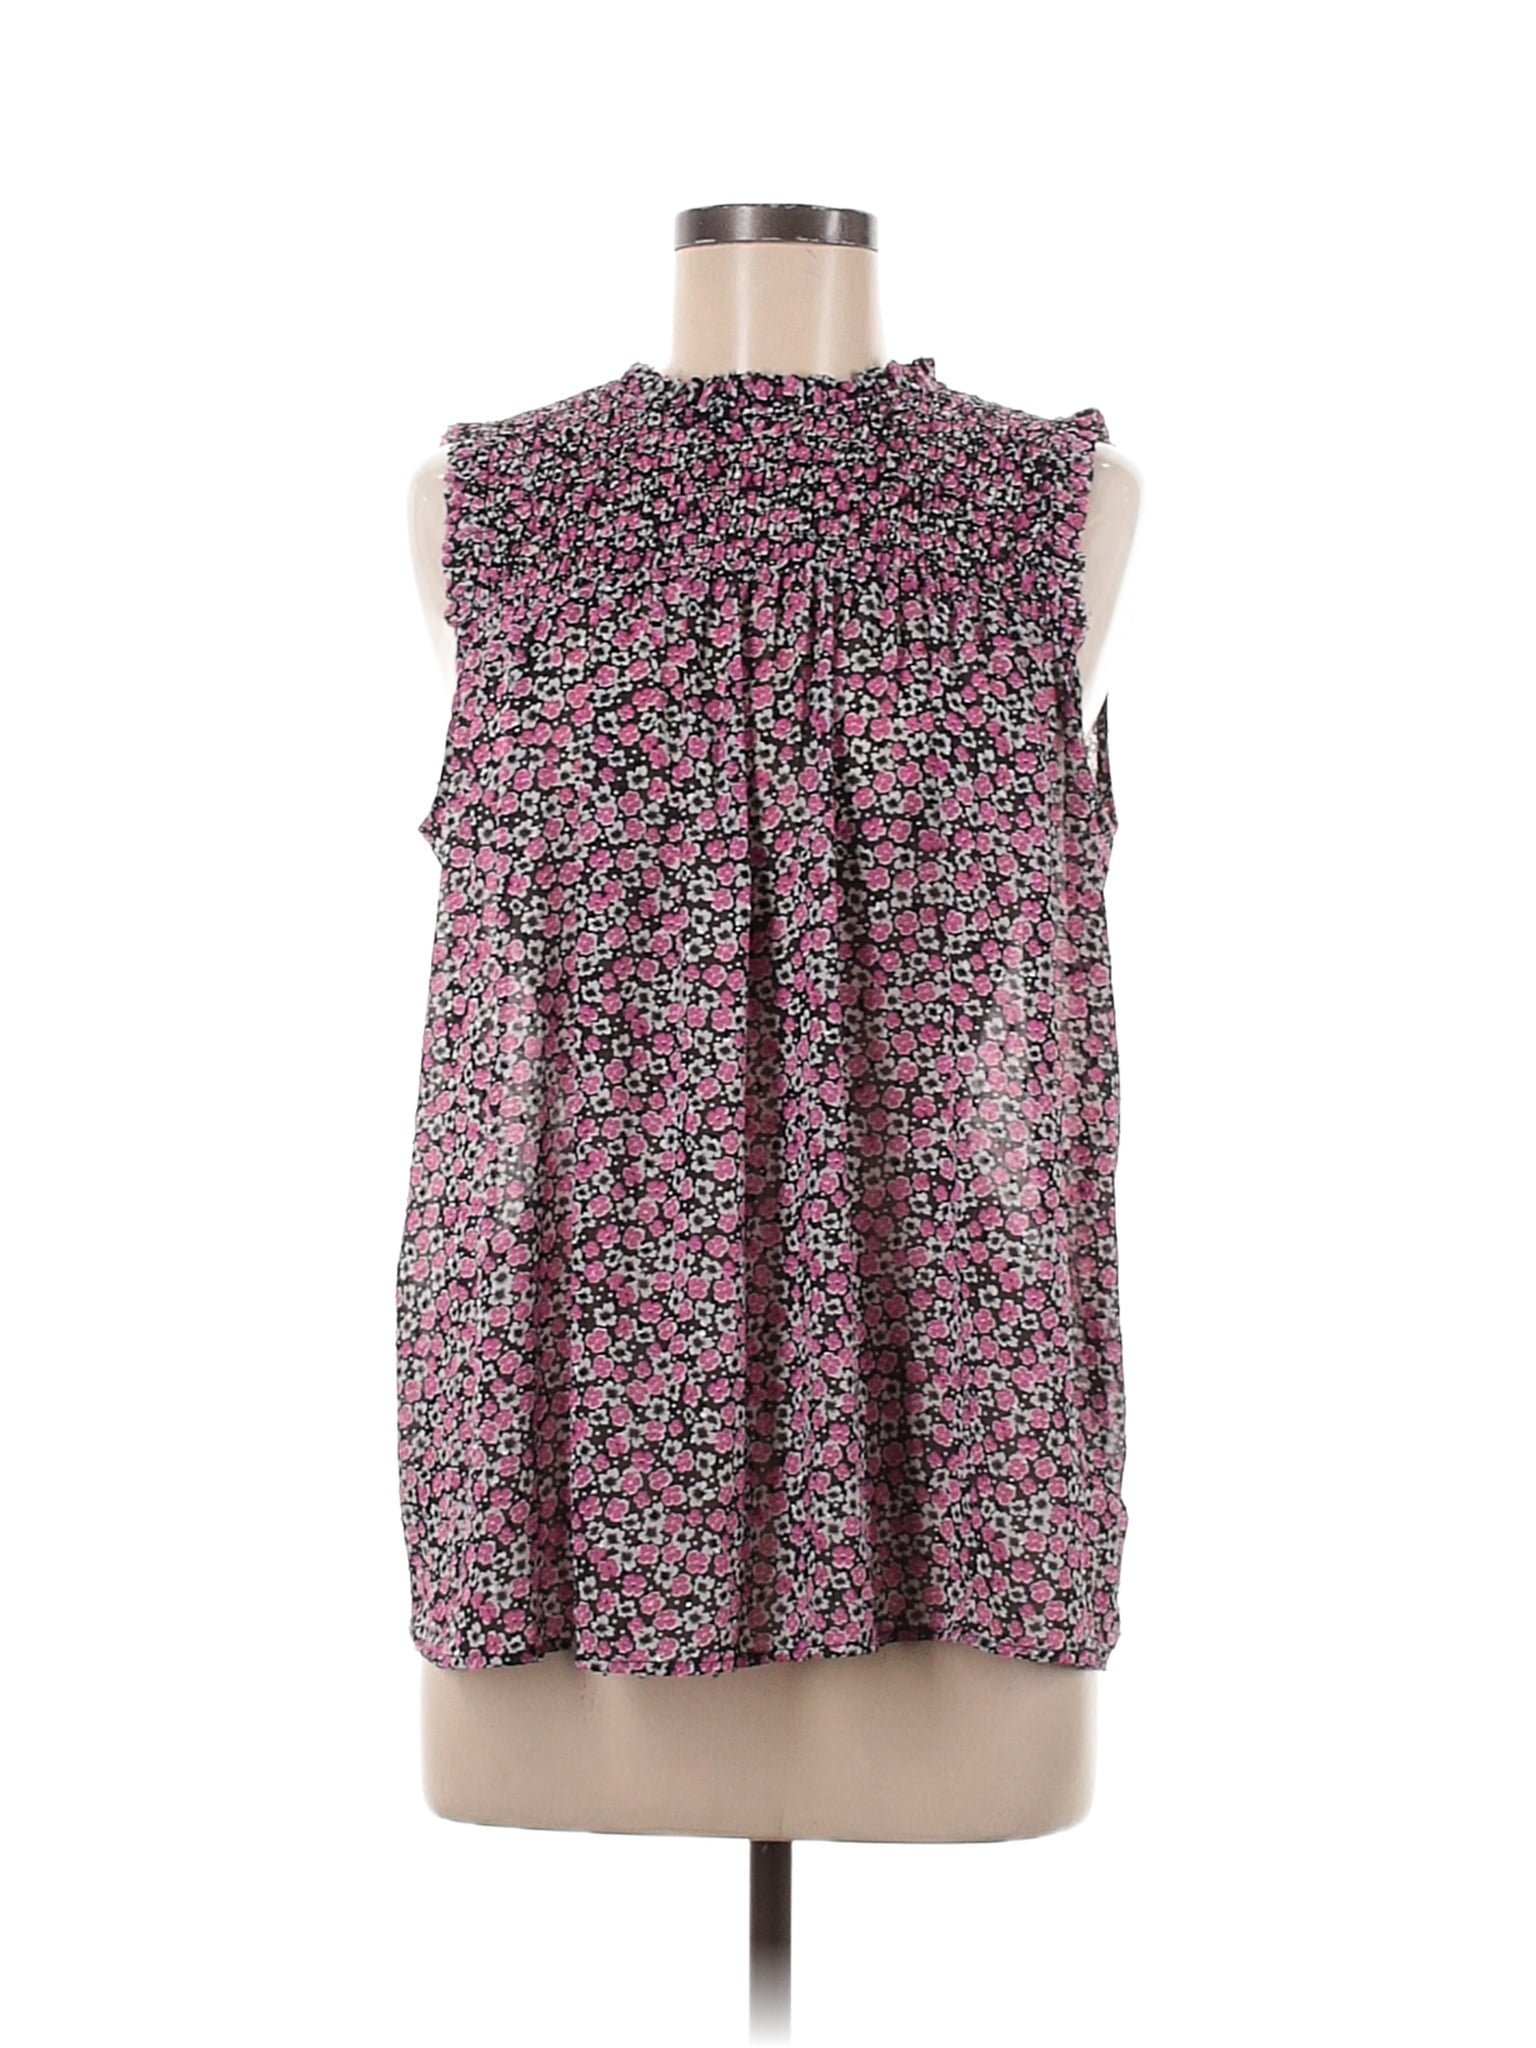 Rachel Zoe 100% Polyester Floral Multi Color Pink Sleeveless Blouse ...